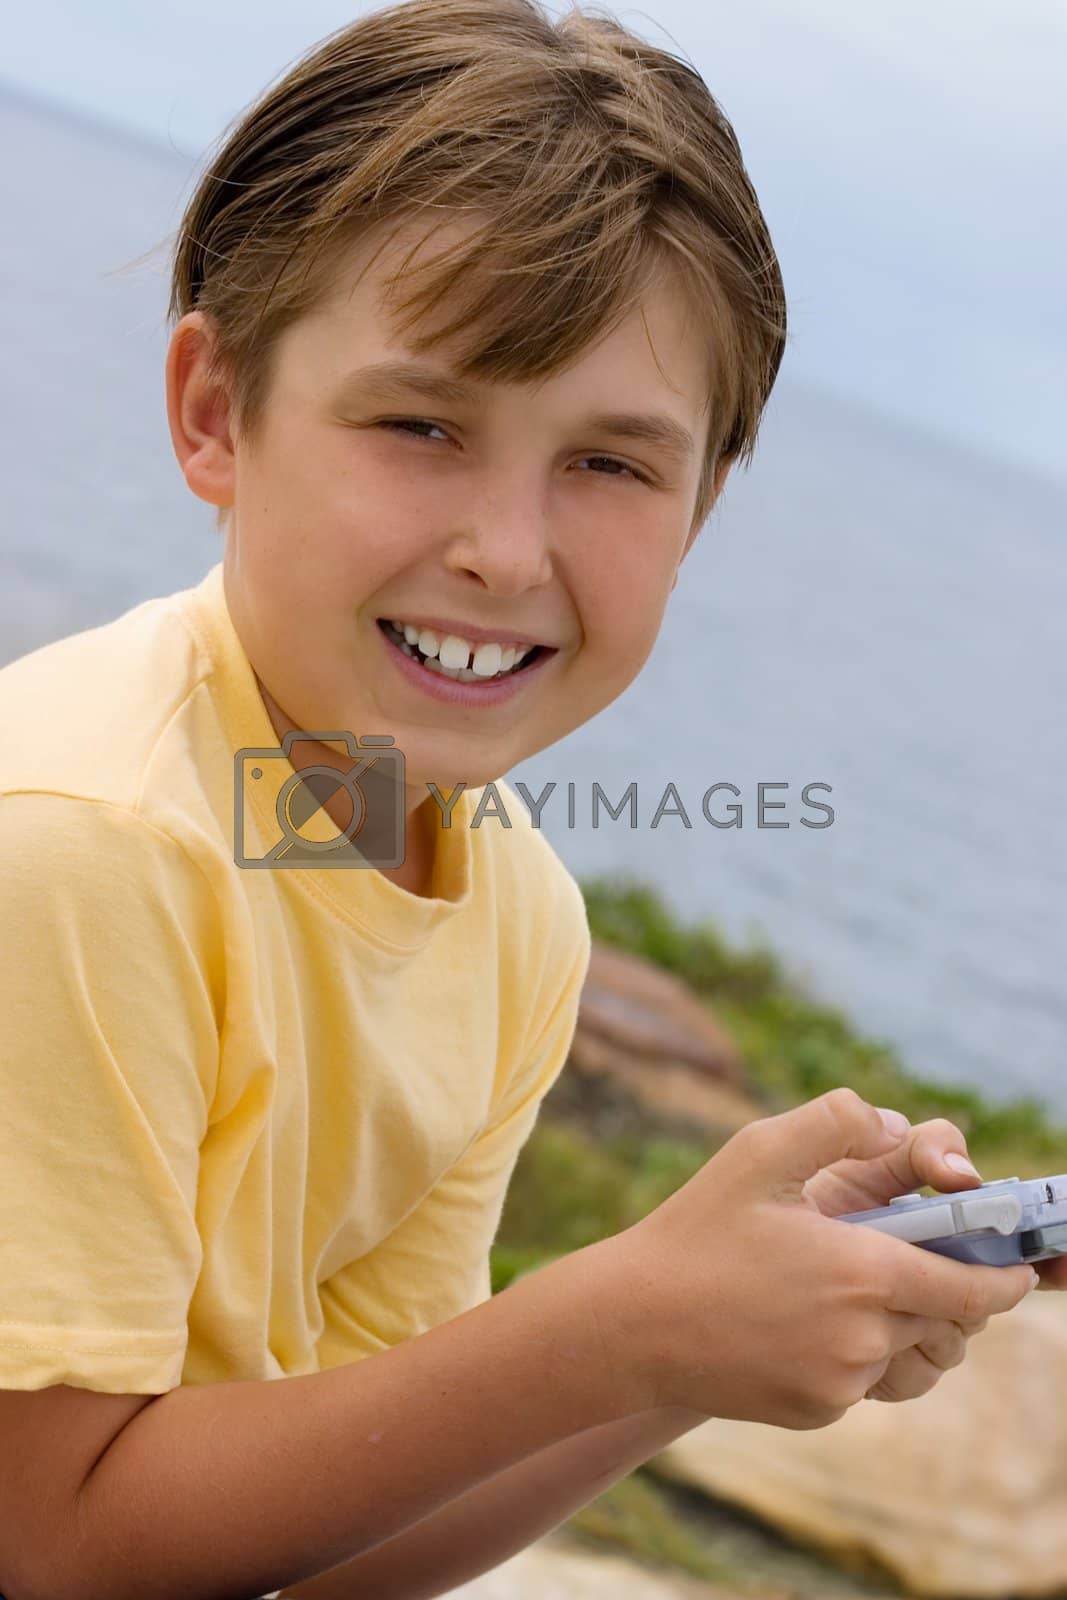 Royalty free image of Child with handheld game by lovleah